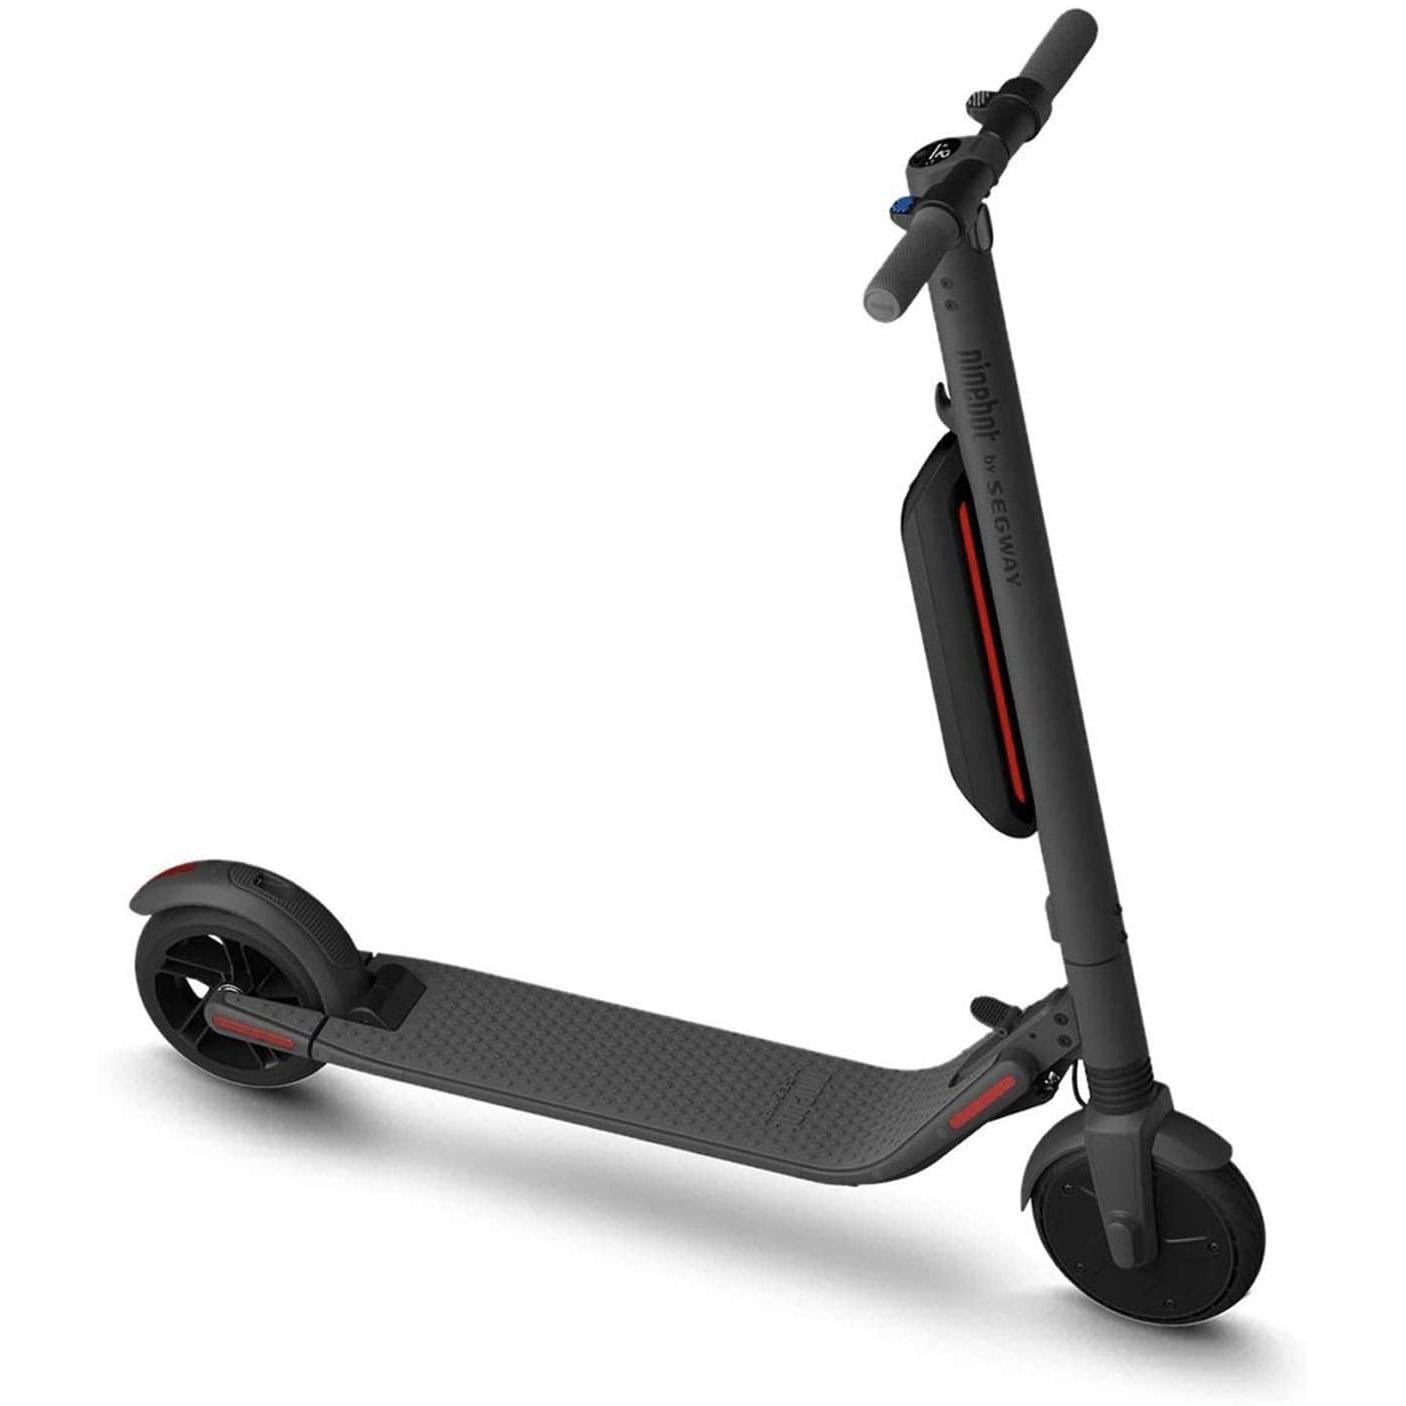 Segway Ninebot ES4 Electric Kick Scooter for $499.99 Shipped